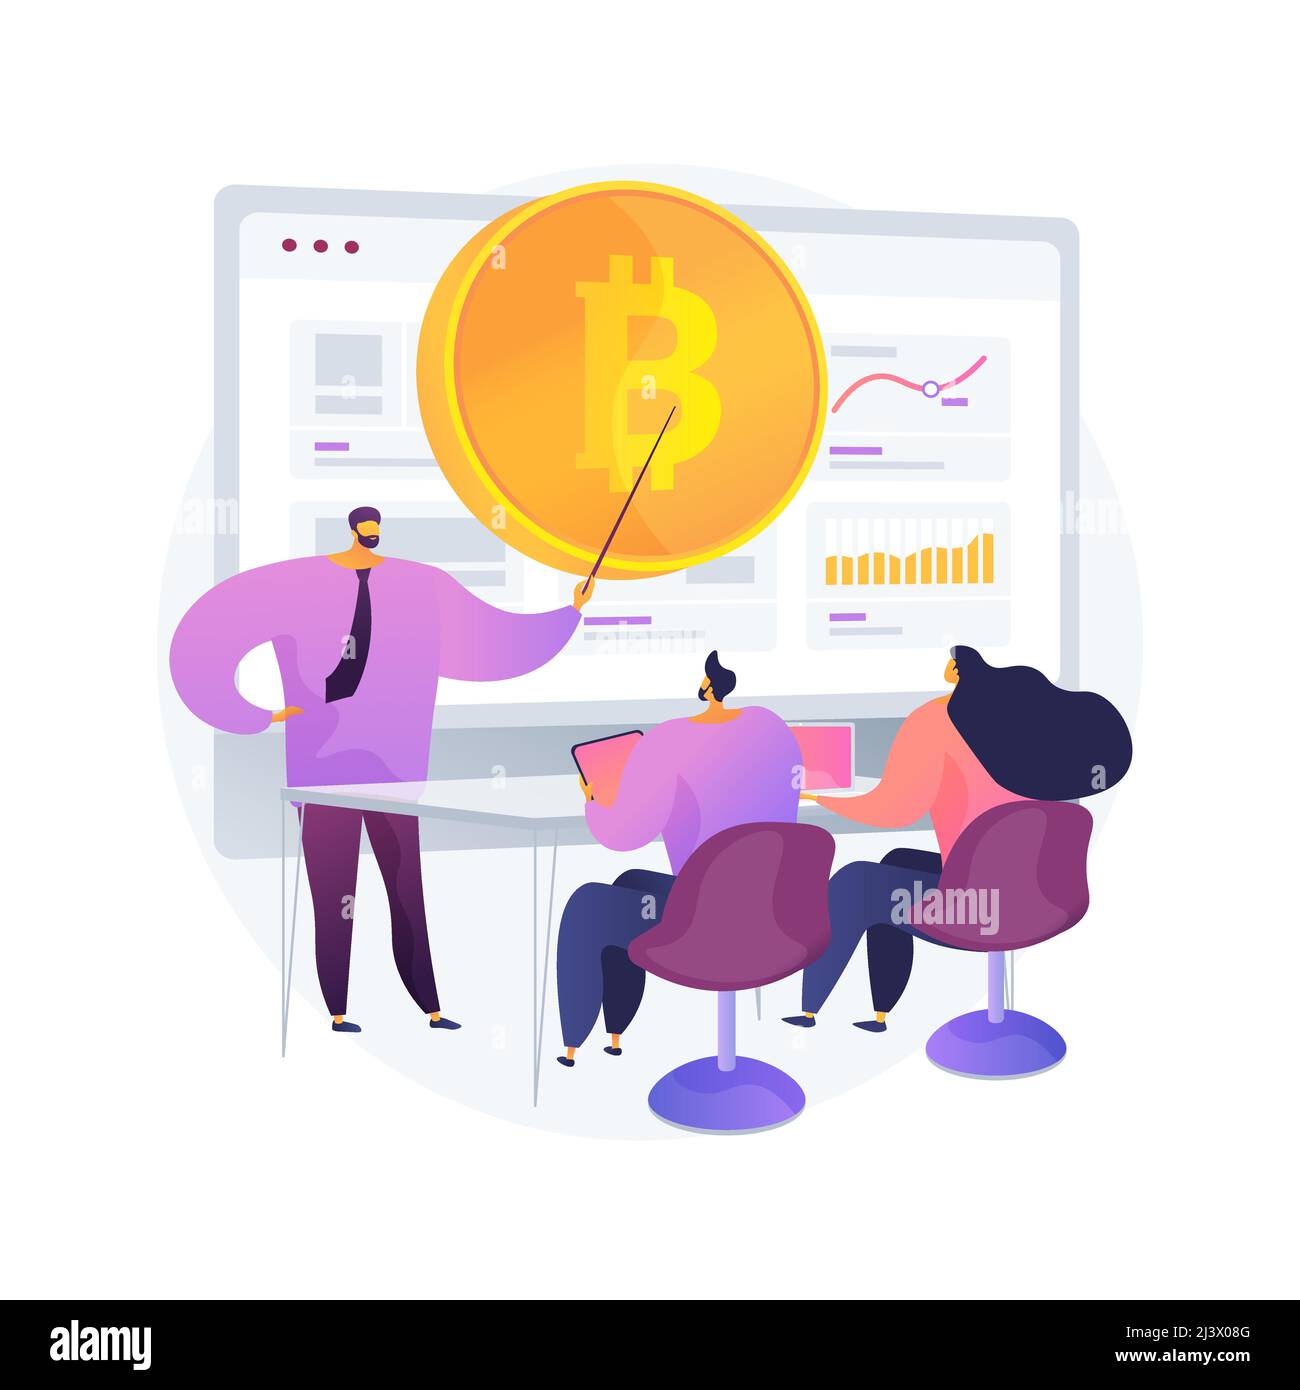 Cryptocurrency trading courses abstract concept vector illustration. Crypto trade academy, smart contracts, digital tokens and blockchain technology, Stock Vector